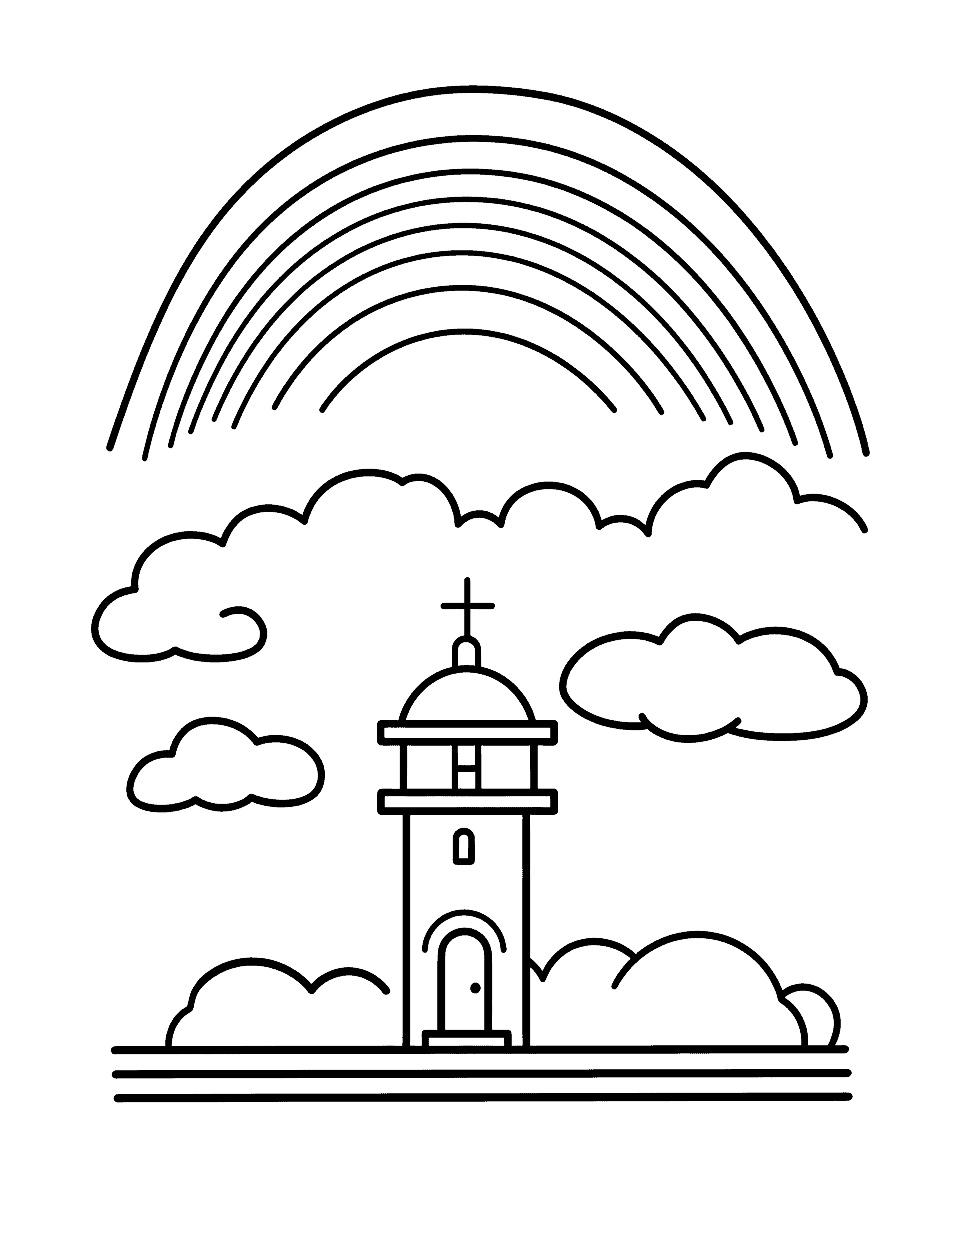 Rainbow Lighthouse Coloring Page - A lighthouse emitting a rainbow-colored light beam.